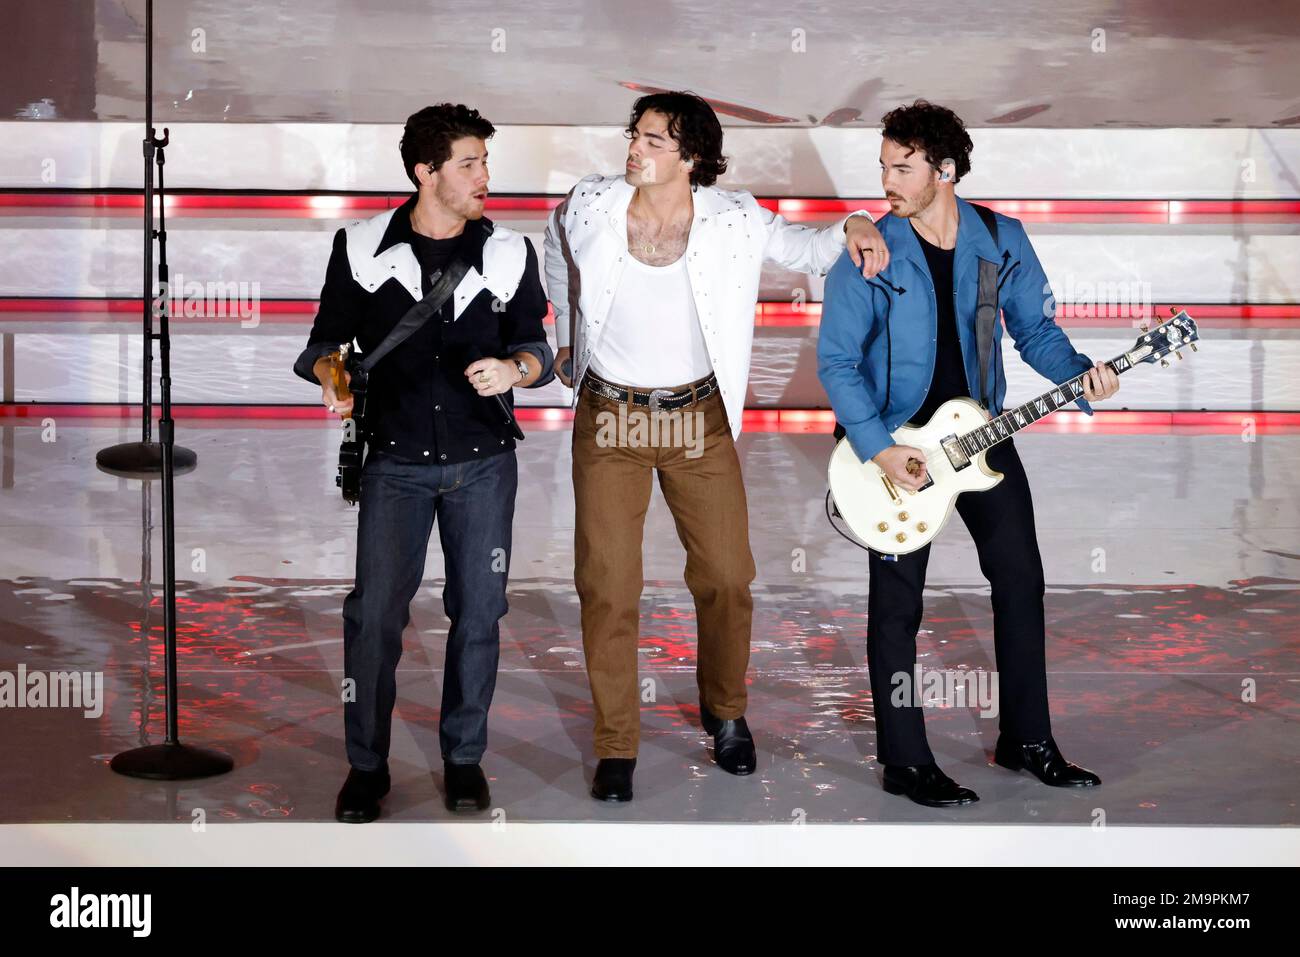 The Jonas Brothers perform during halftime an NFL football game